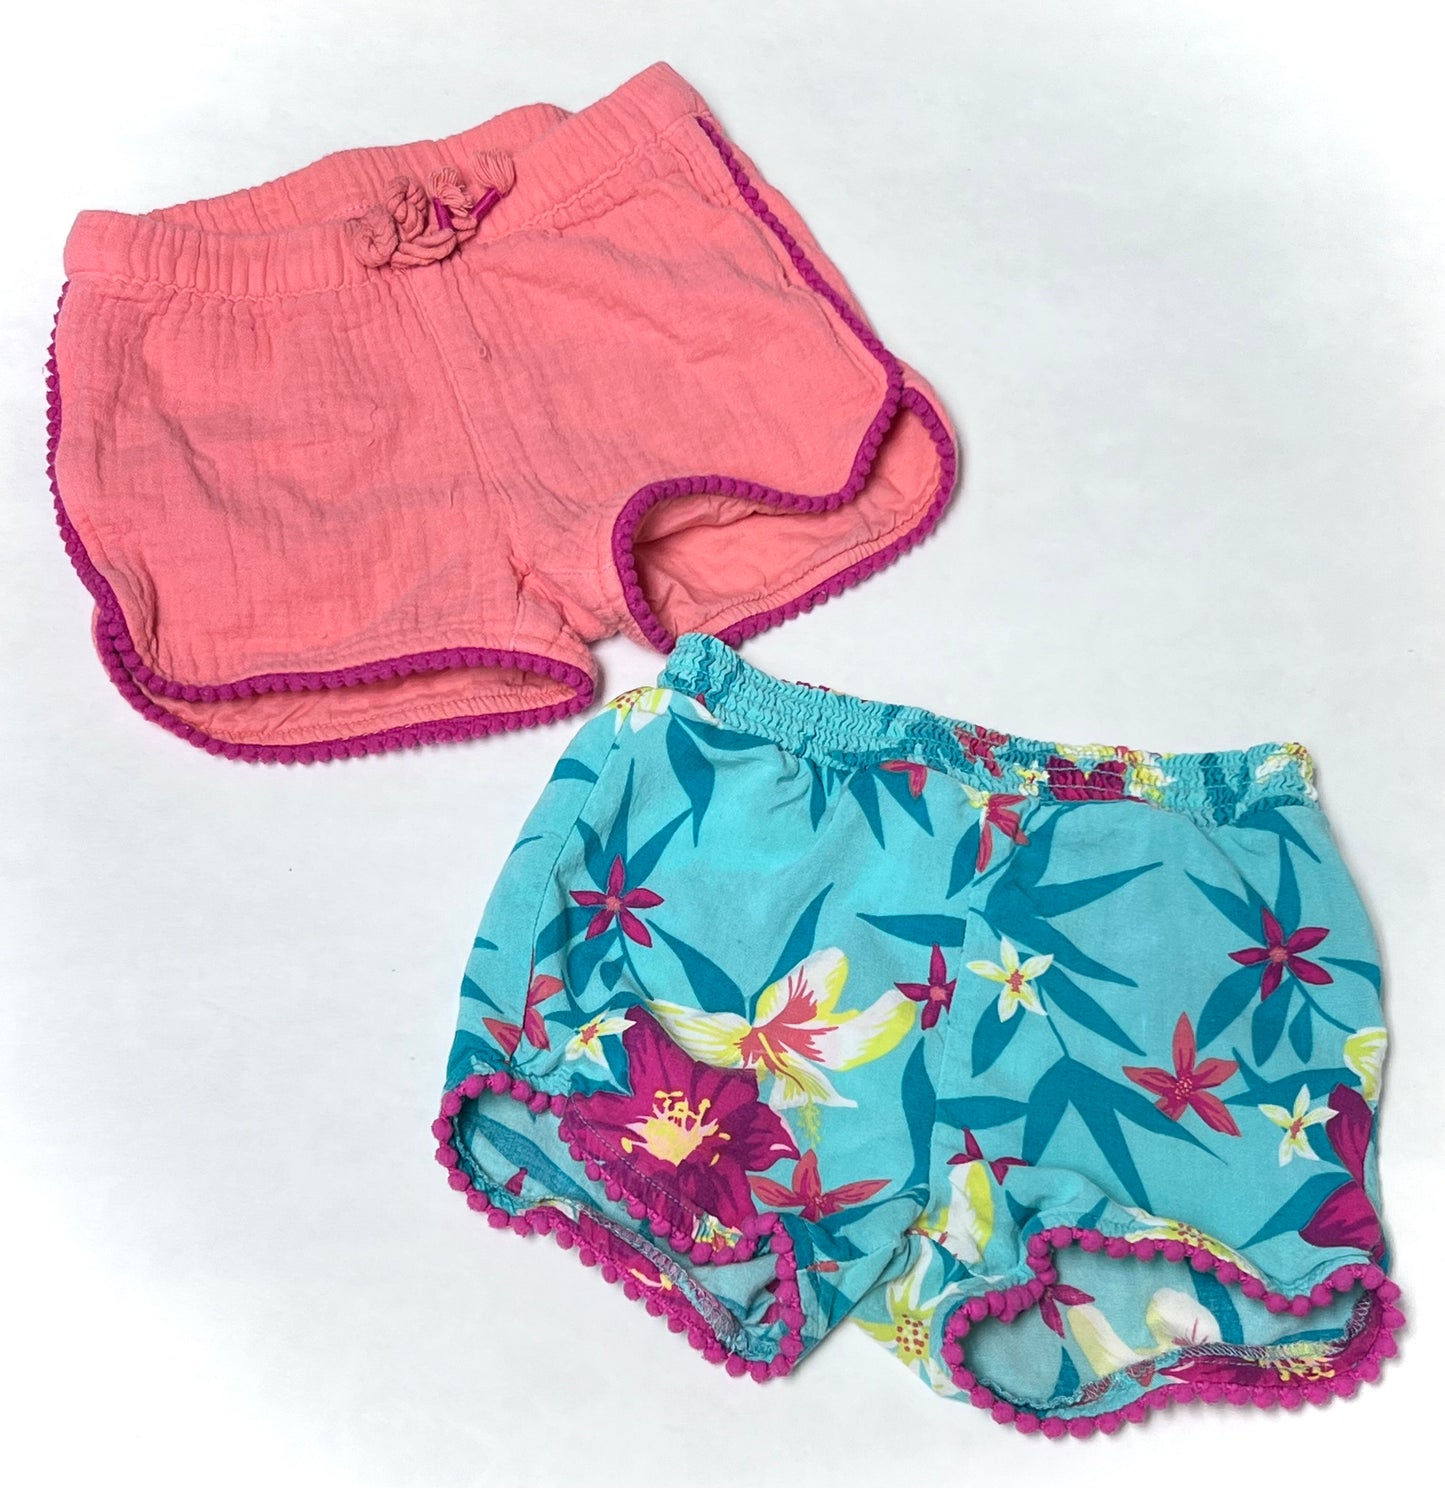 Pull-on shorts bundle, toddler girl: pink/coral 18mo Cat & Jack (but fit like 2T), floral Circo 2T. Great for over swimsuits! GUC.